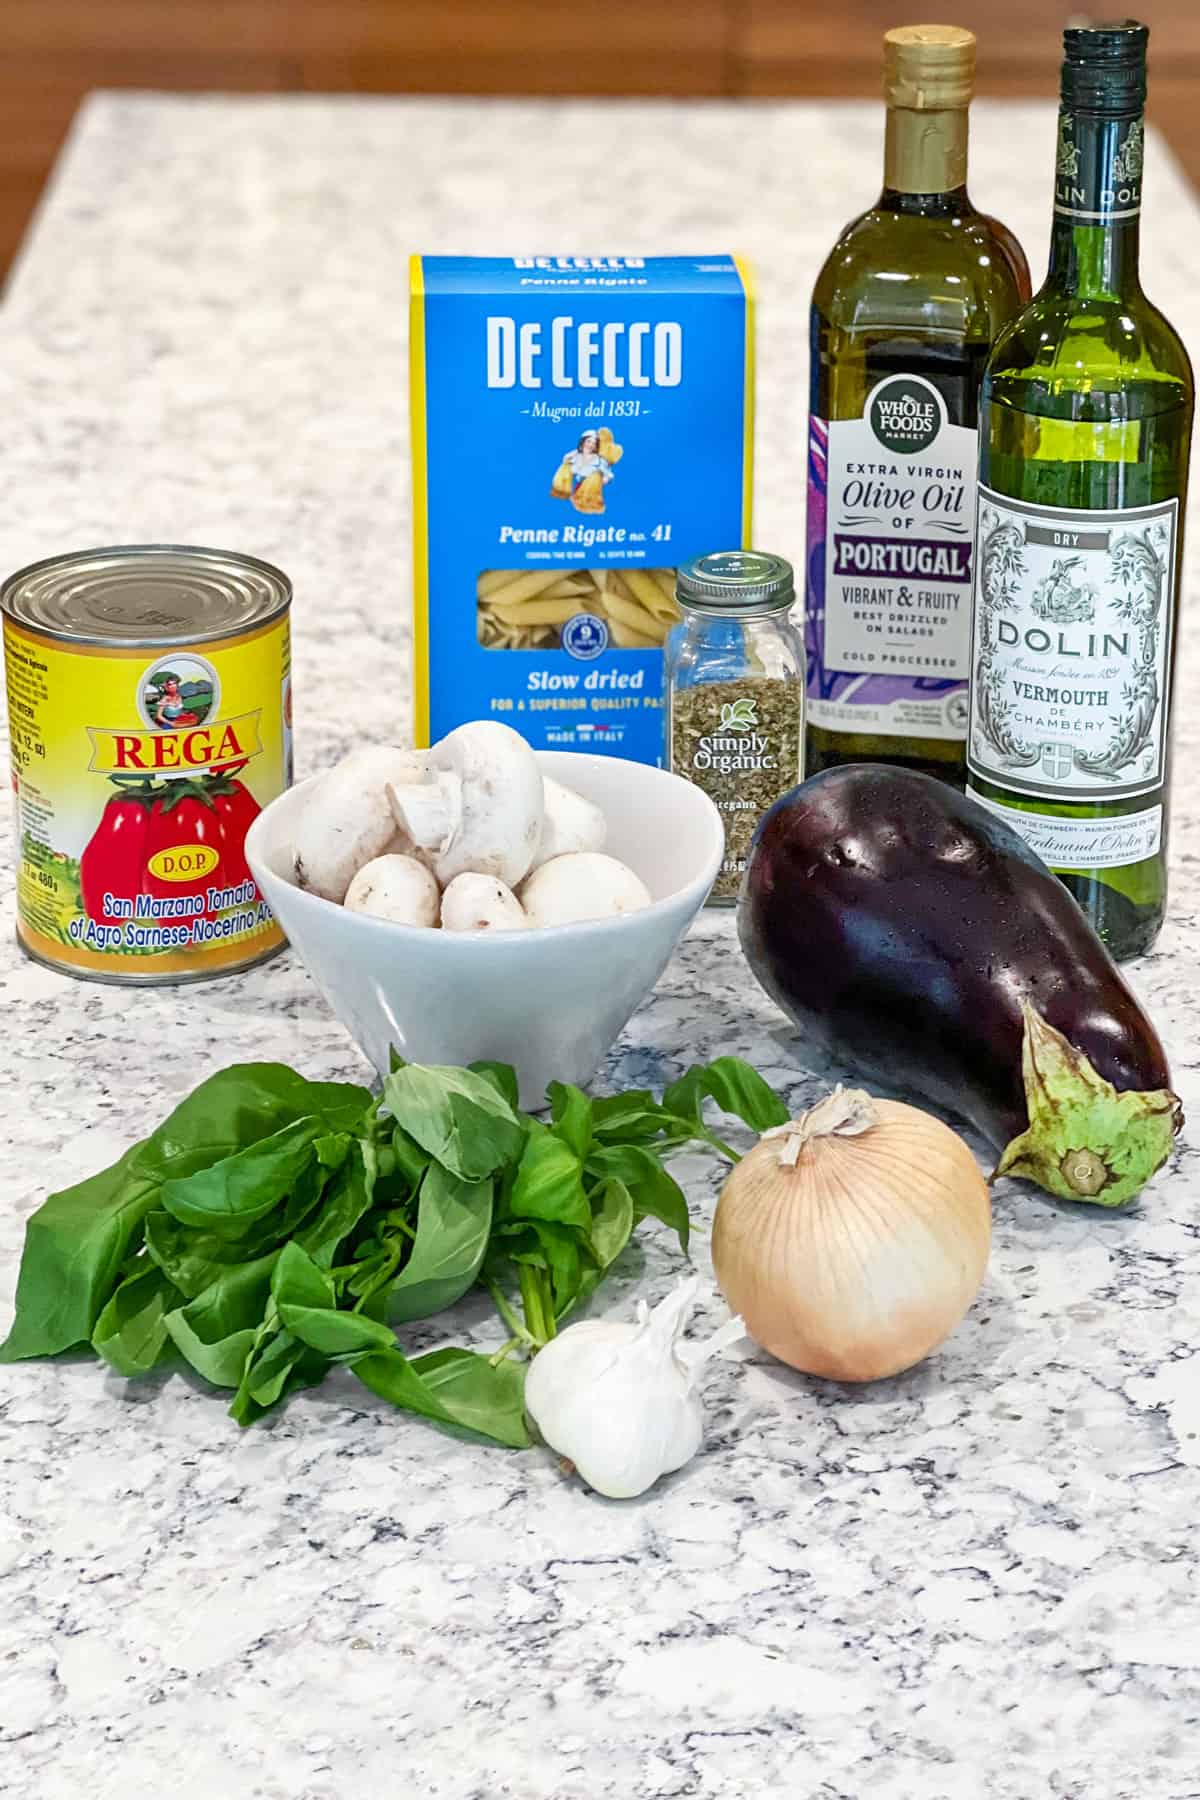 ingredients on a marble countertop: bottle of olive oil, bottle of dry vermouth, box of penne pasta, yellow onion, bulb of garlic, can of Italian tomatoes, bowl of white mushrooms, bunch of fresh basil, large eggplant.